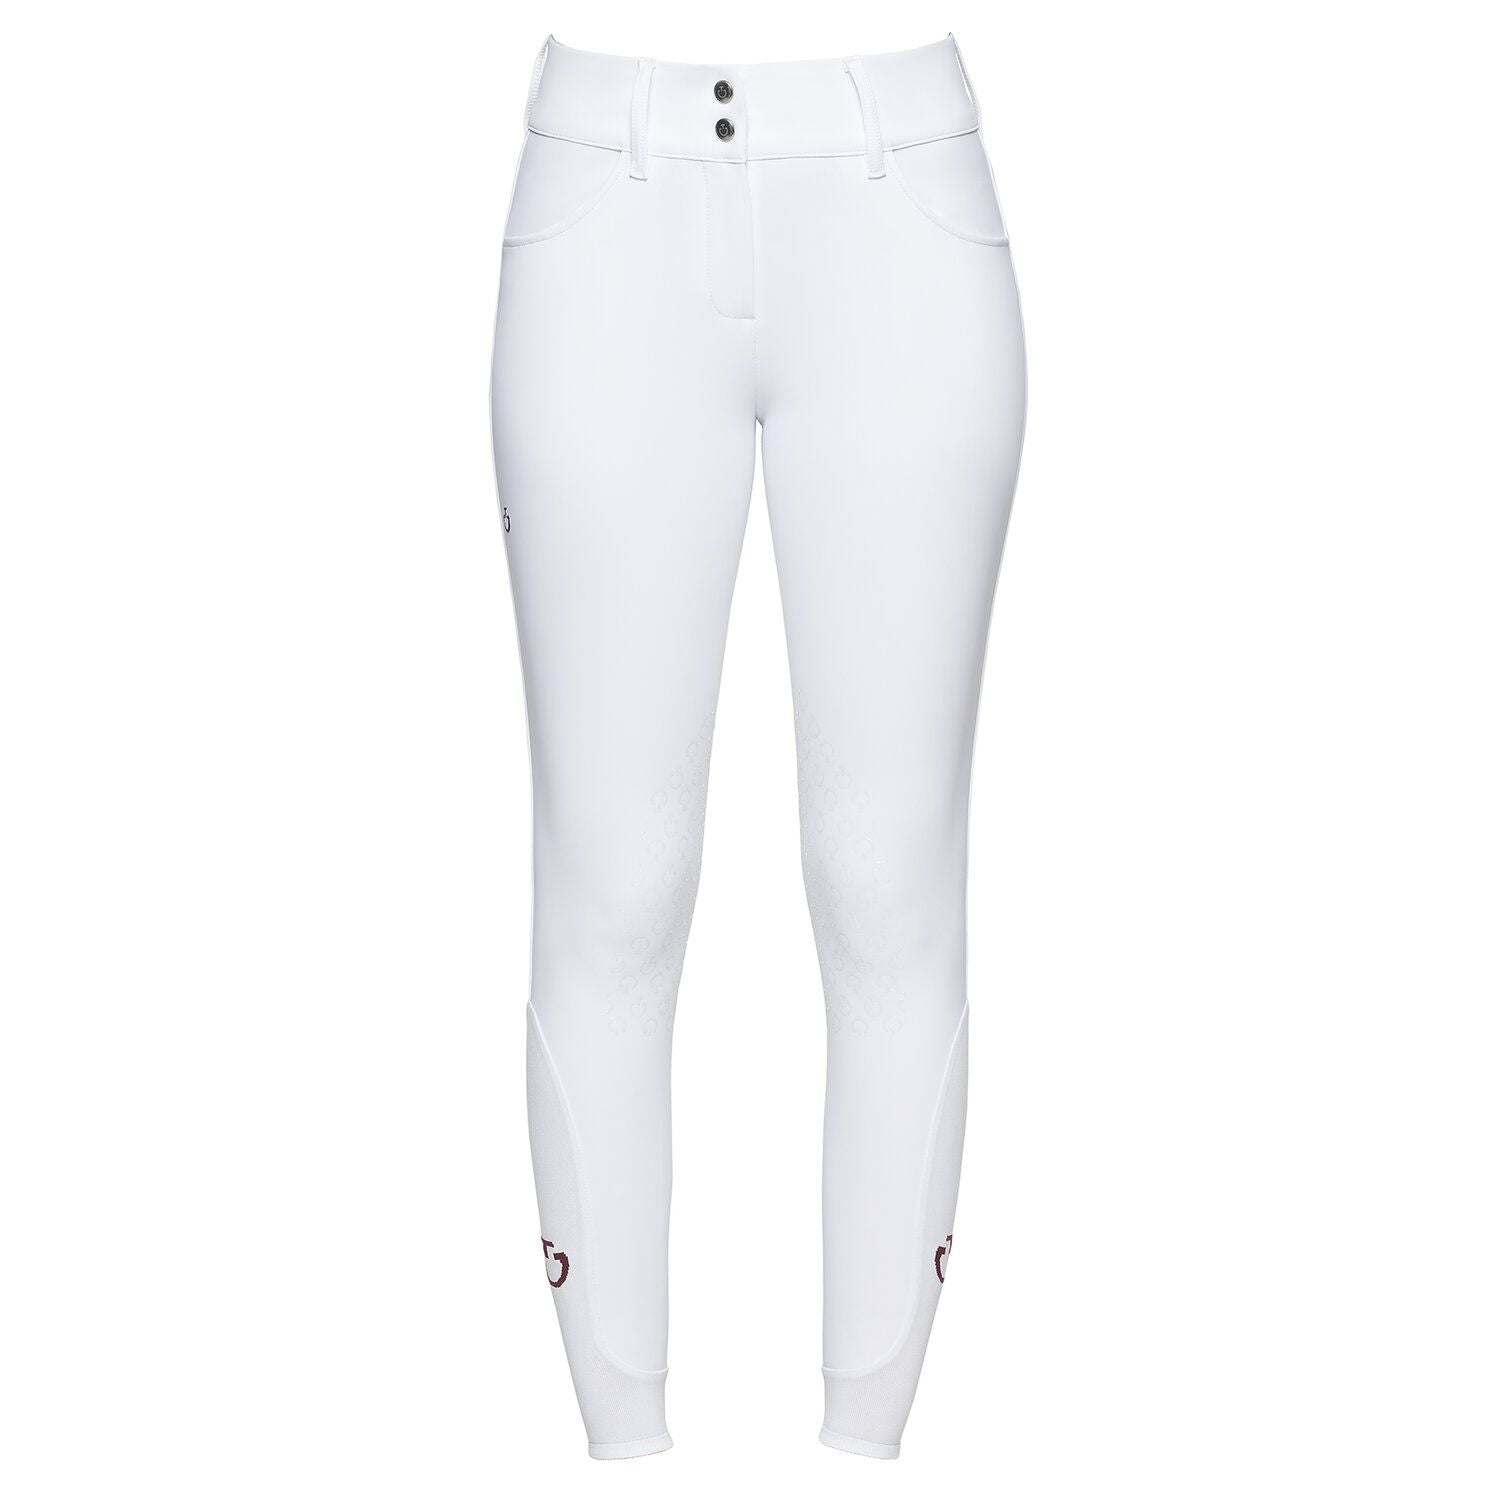 product shot image of the Ladies High Rise American Full Grip Breeches - White